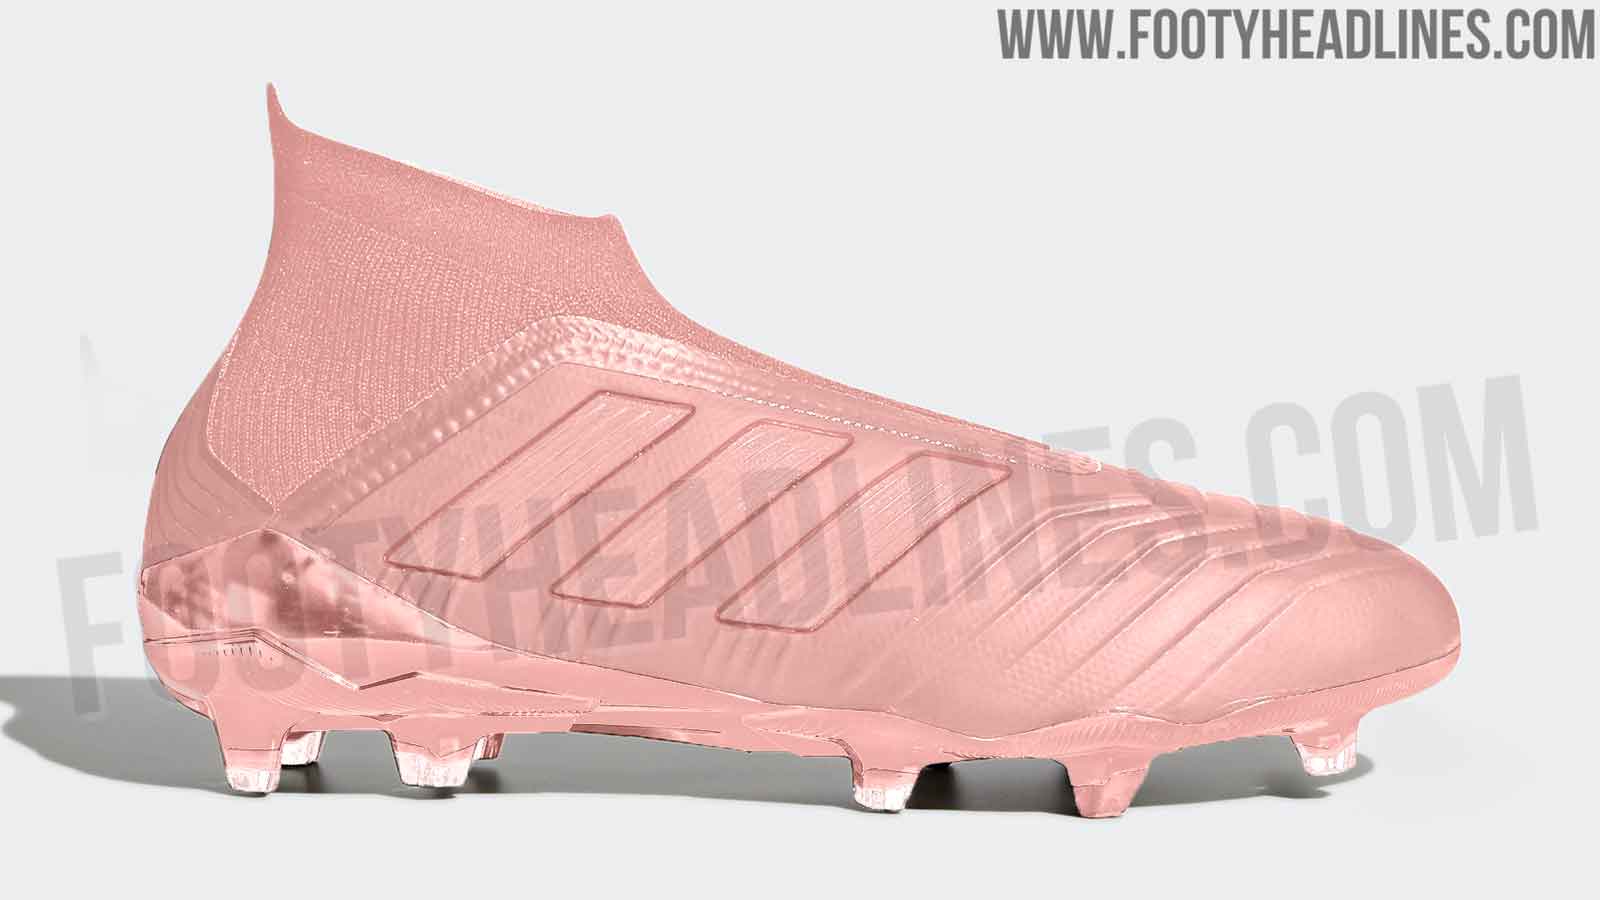 Suave Incontable Alegrarse Exclusive: Adidas Predator Keeper Gloves Confirm Leaked Pink Adidas Predator  18 Boots - Footy Headlines